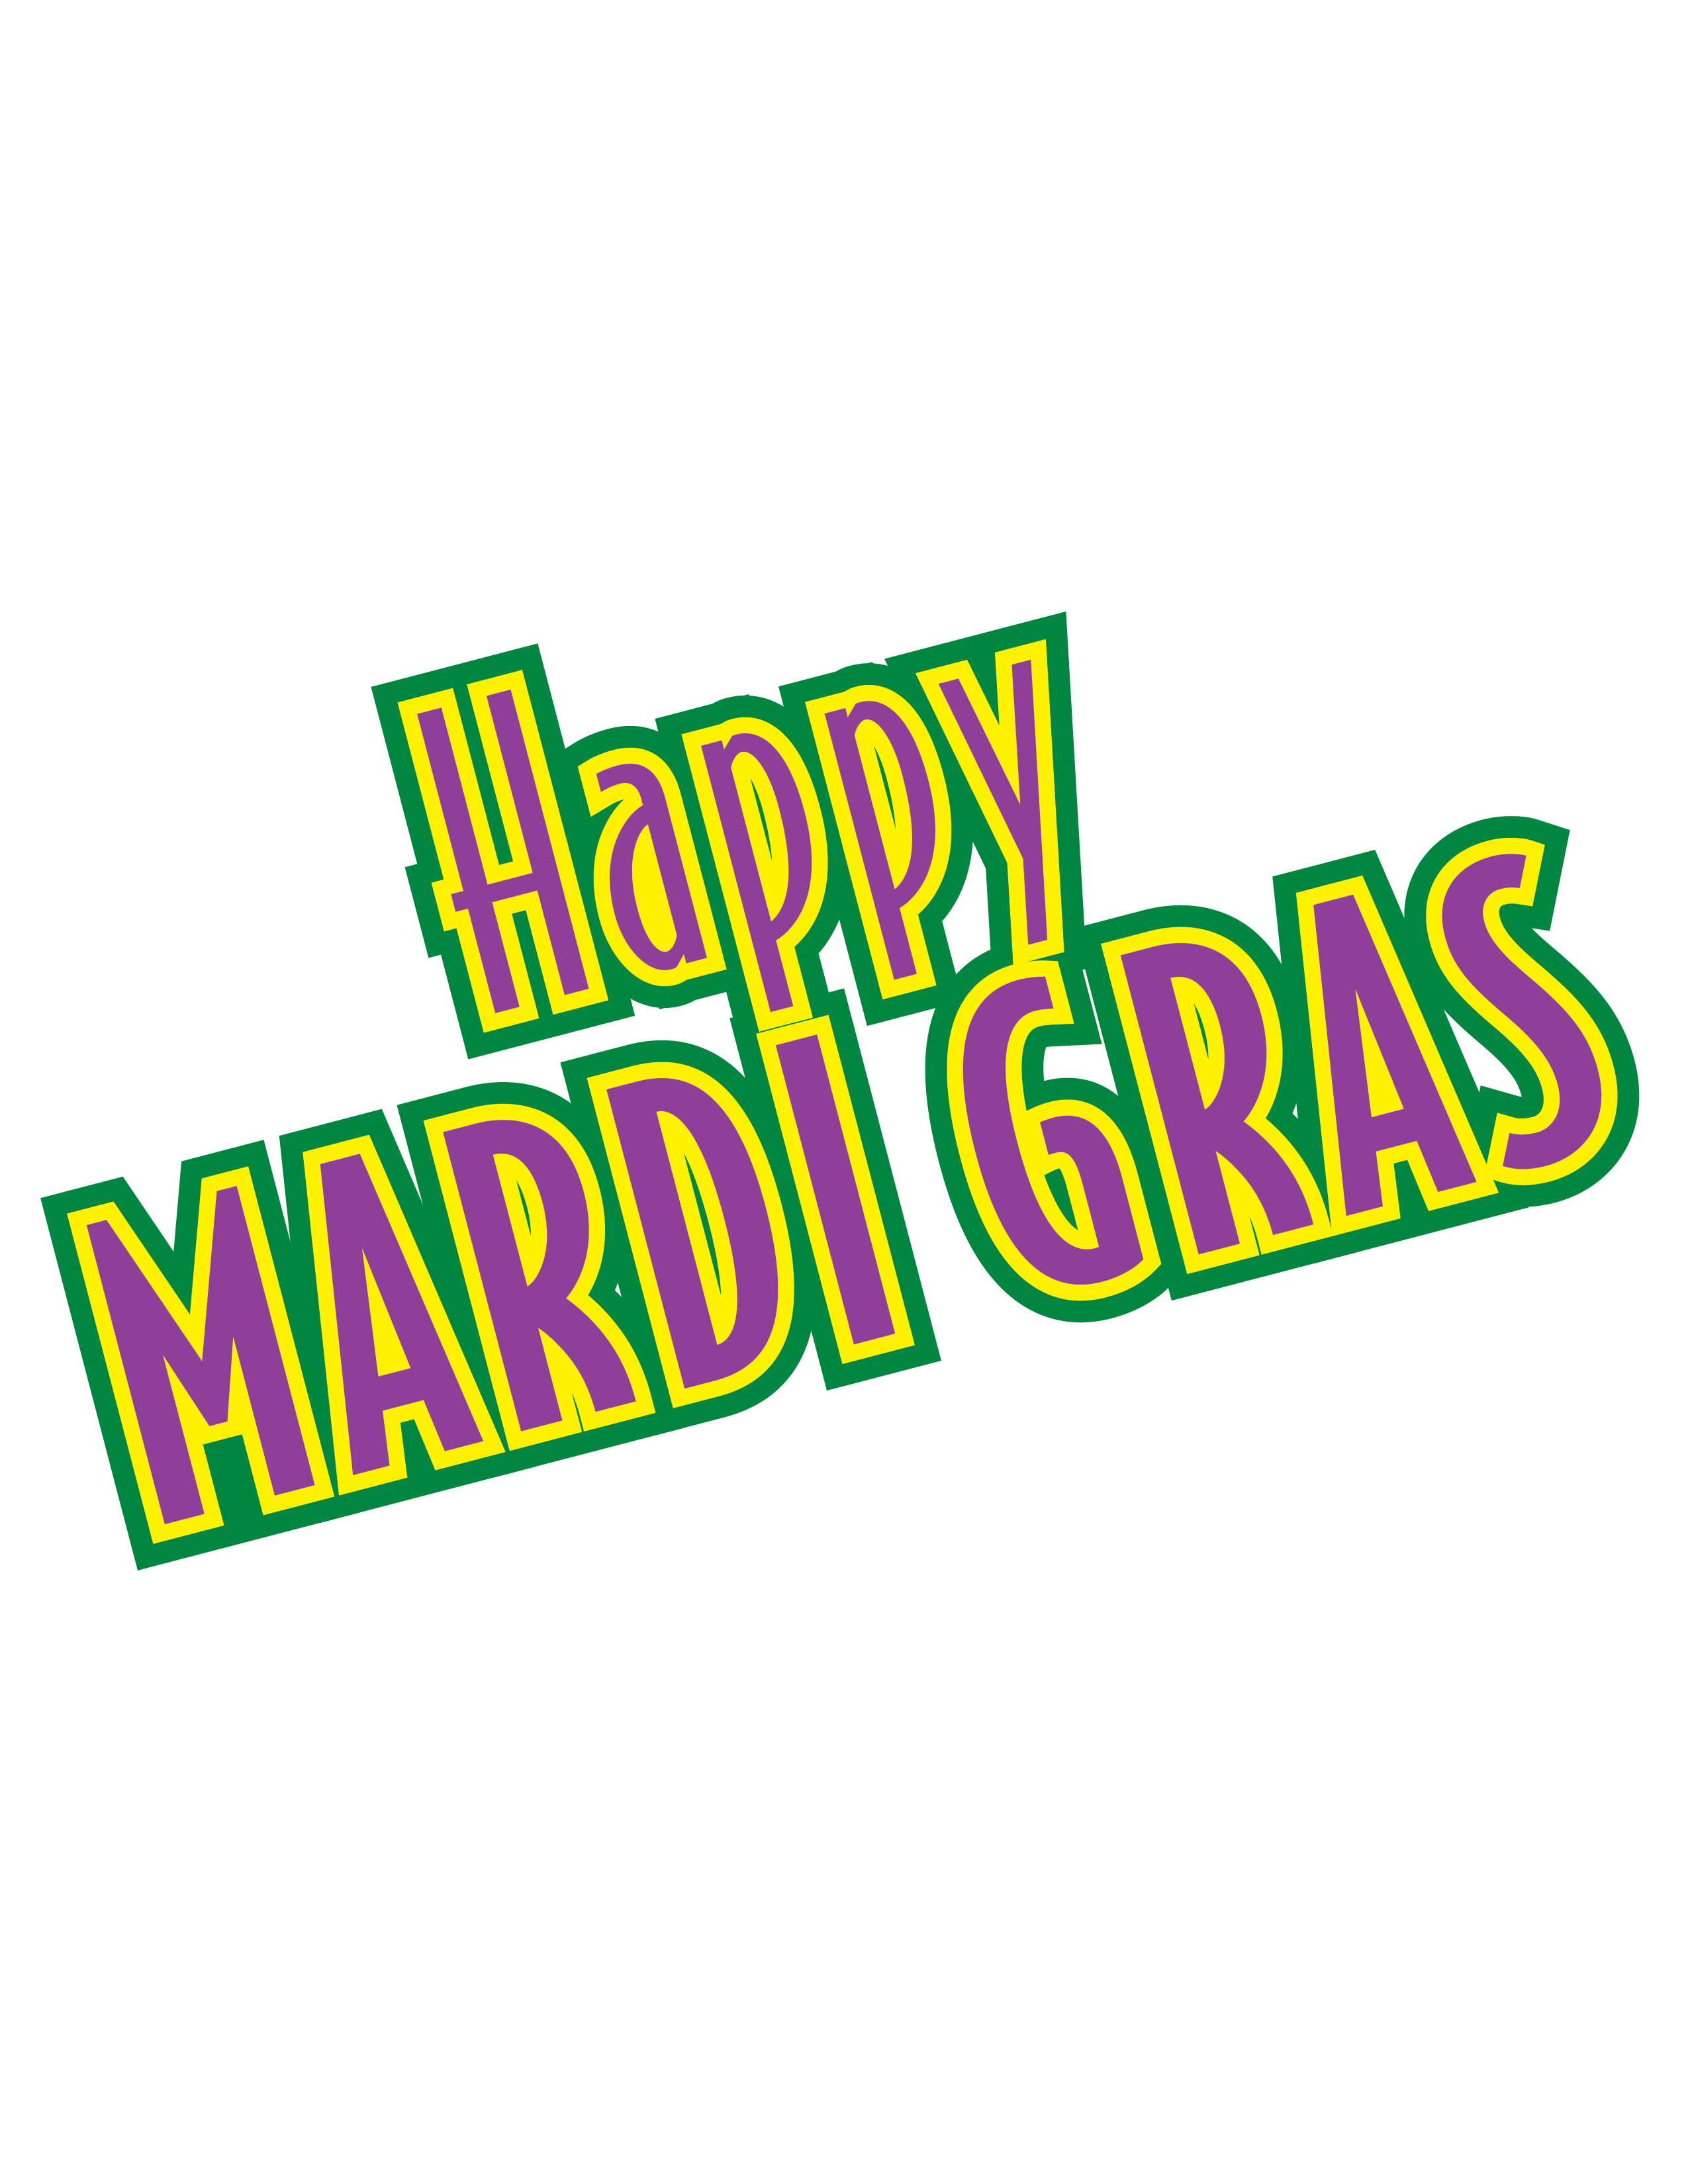 Mardi King Orleans Gras In Cake Clipart